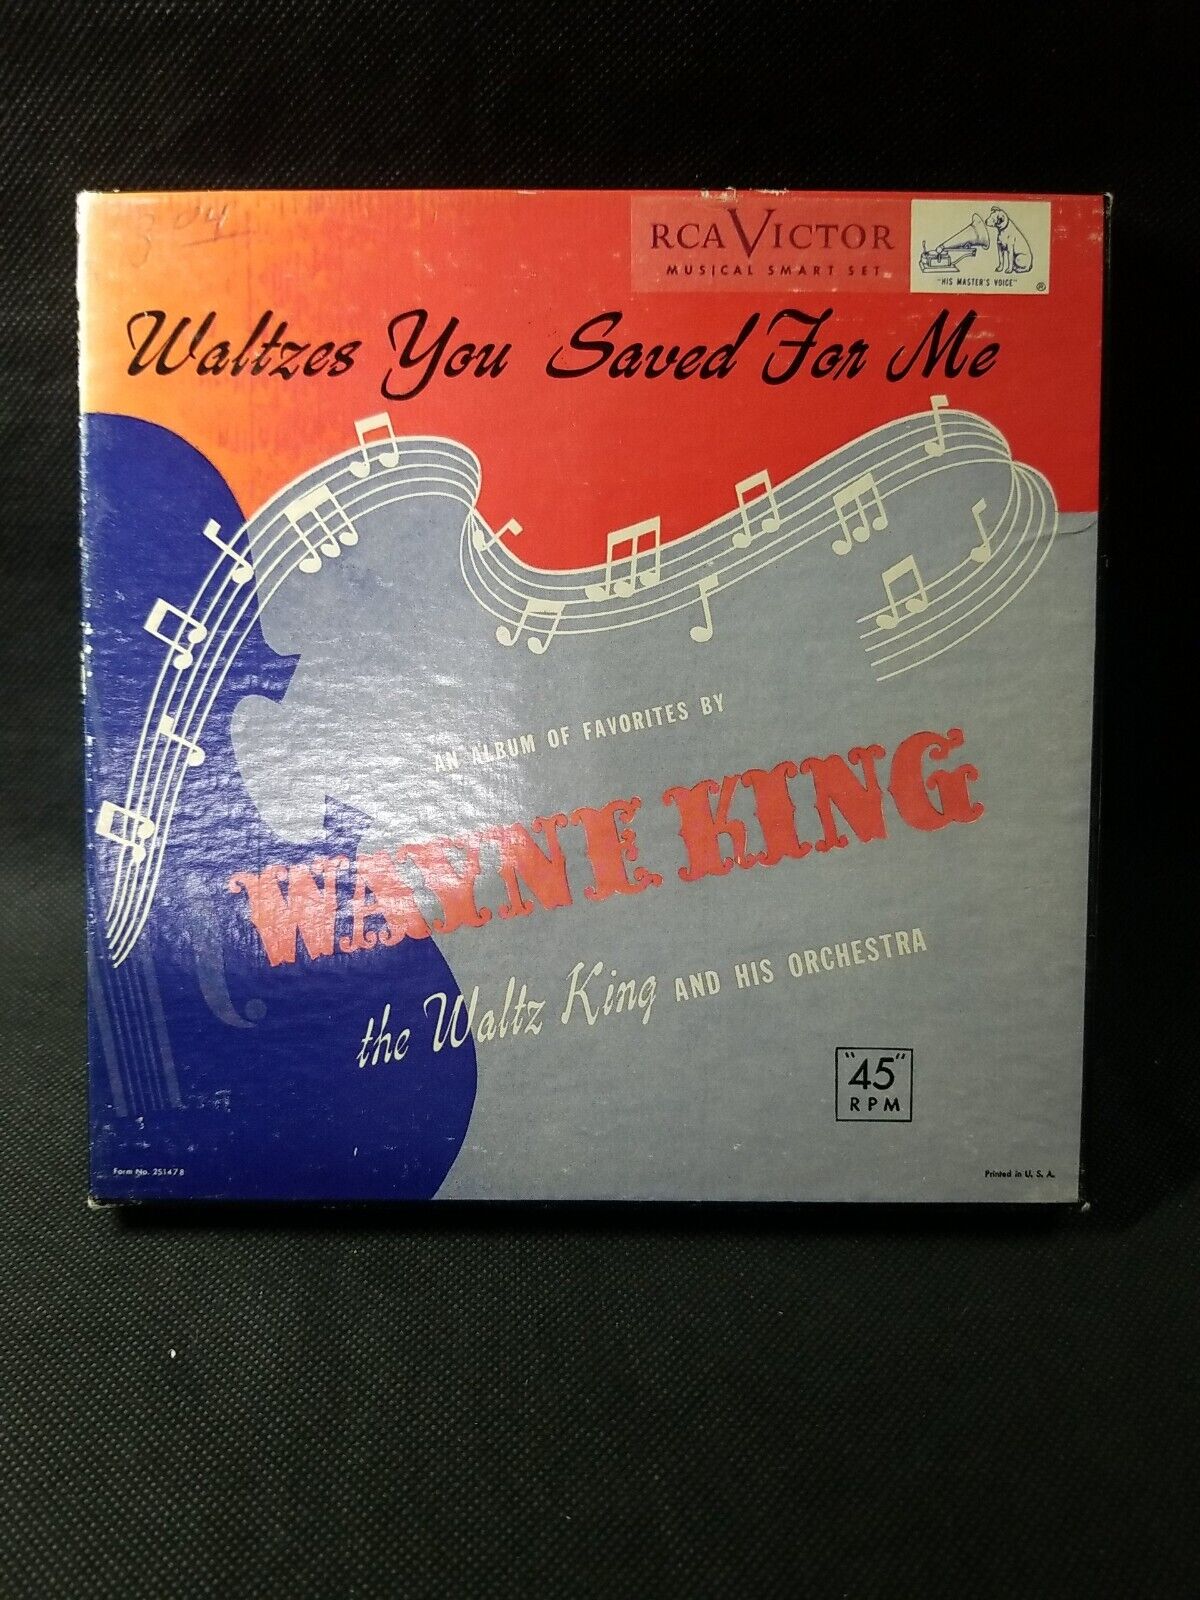 VTG Wayne KING Orchestra RCA Victor 45 RPM Waltzes you saved for me Box Set